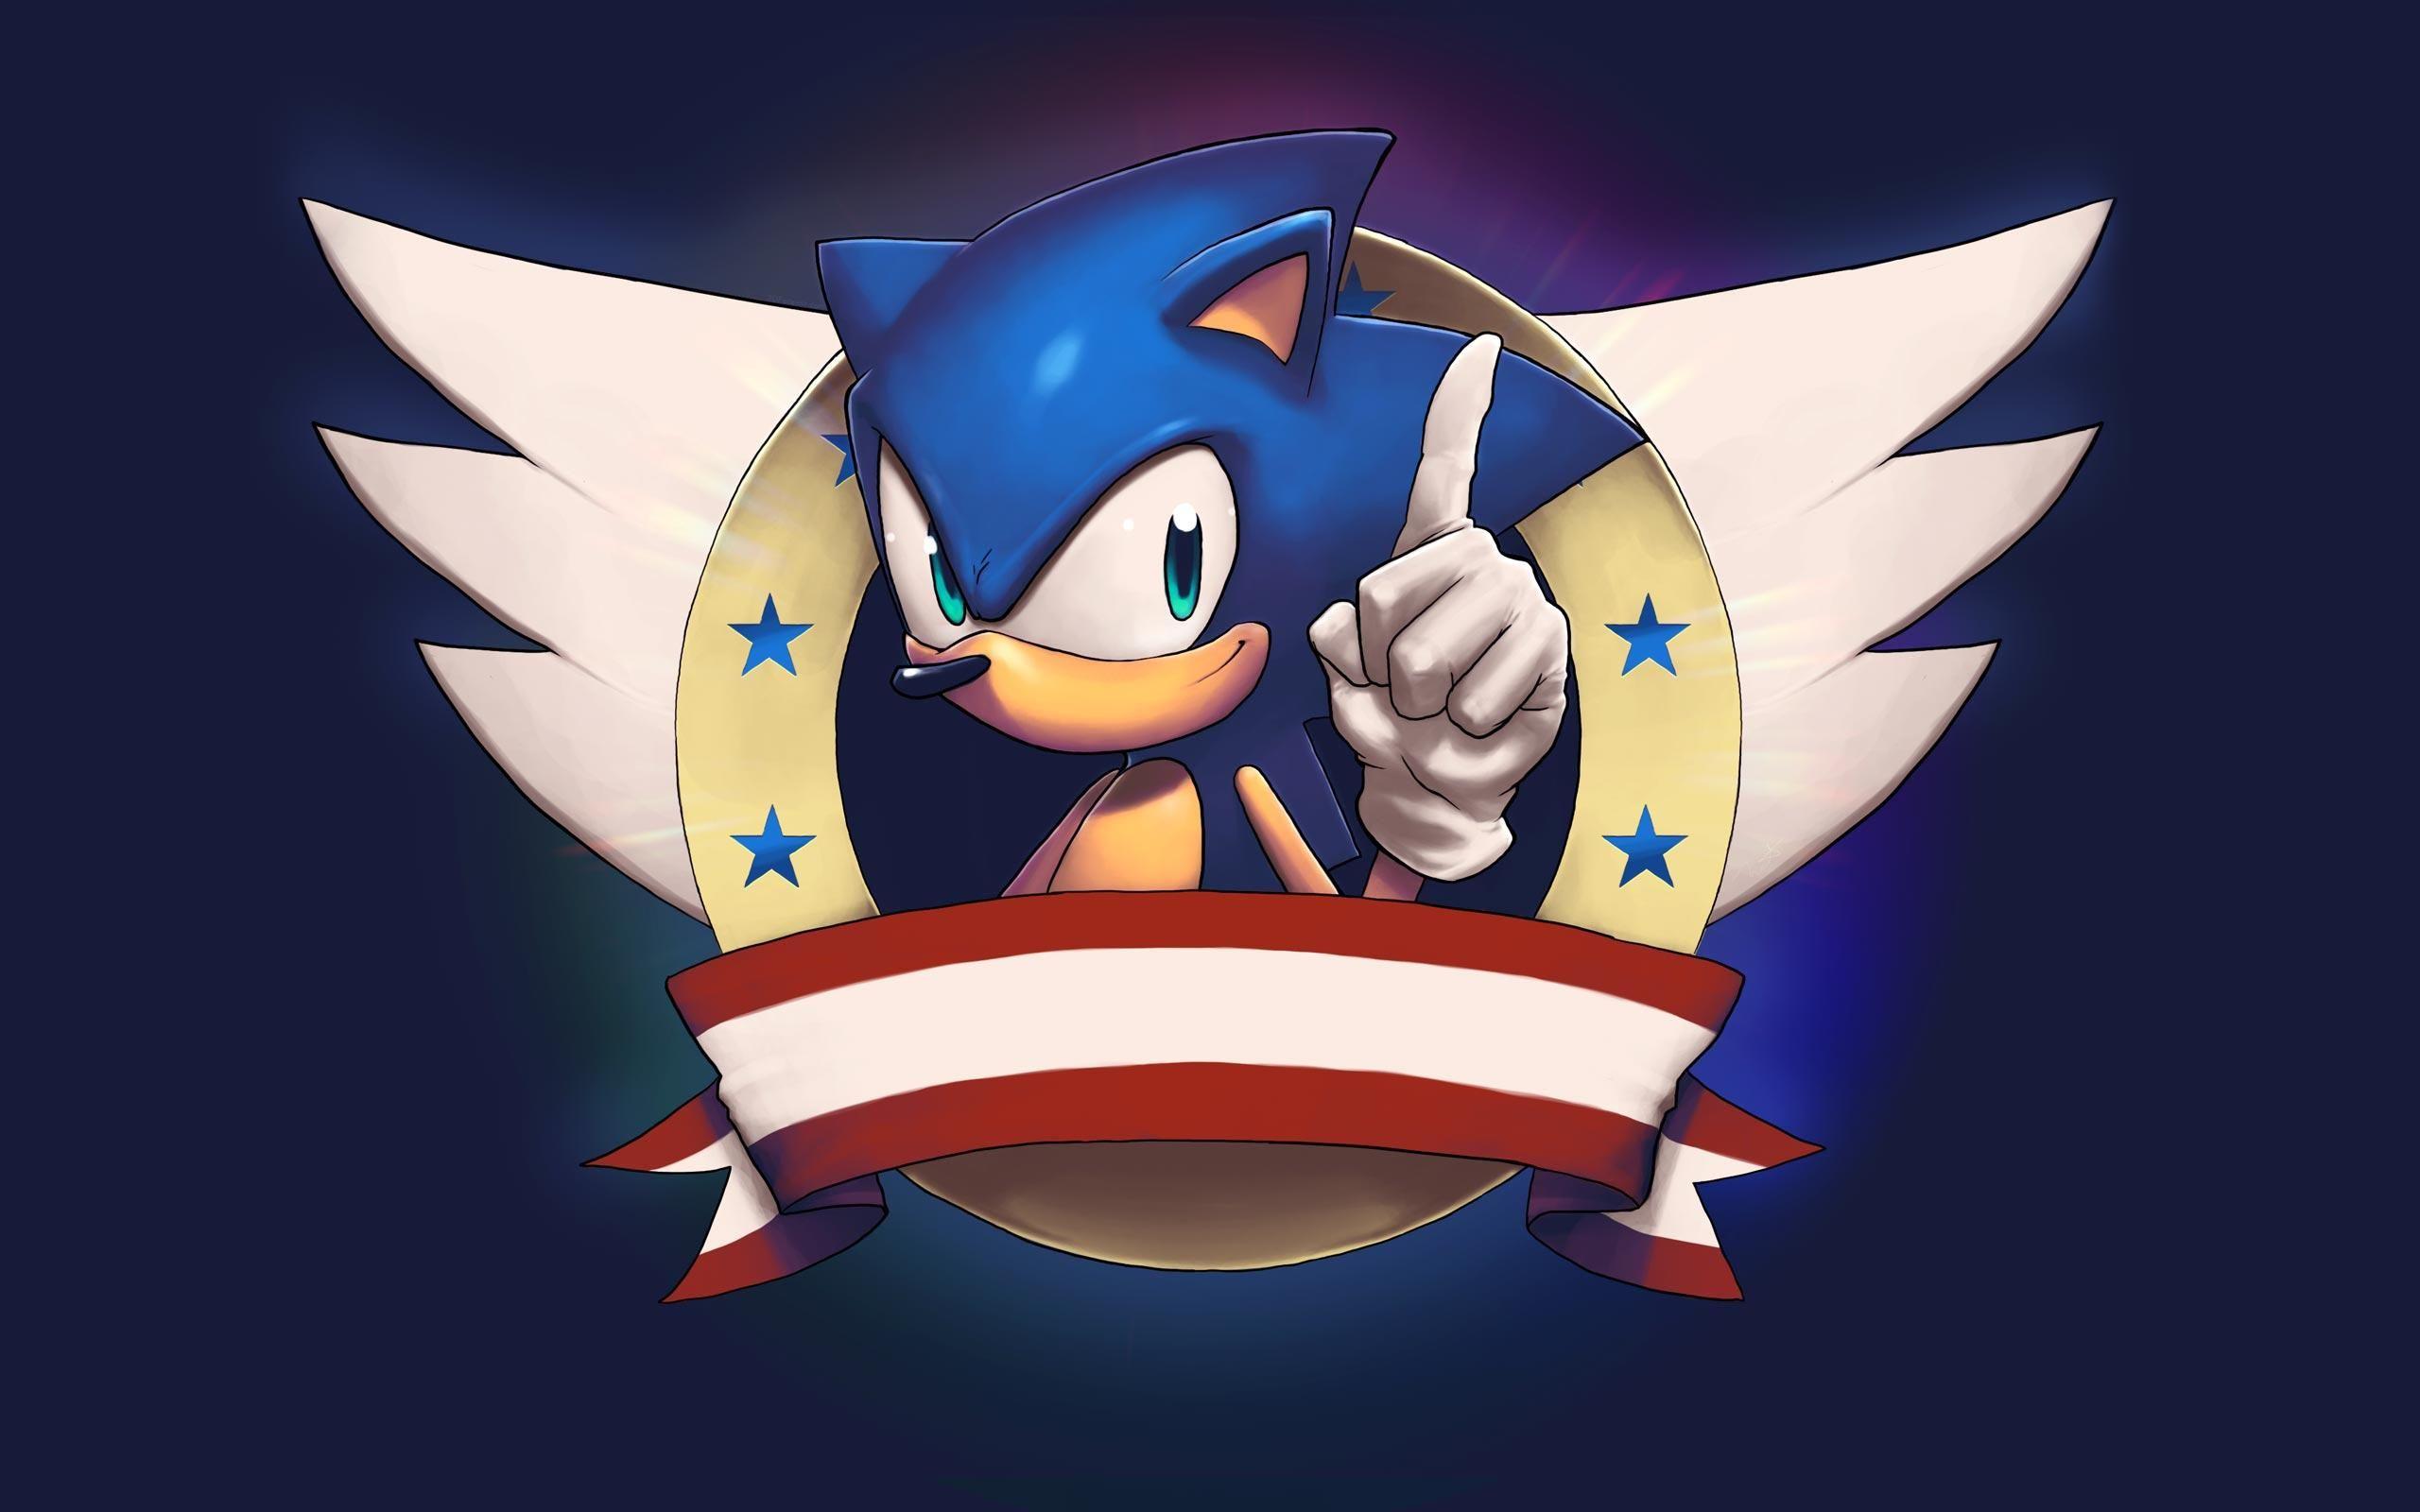 Furnace Sonic Wallpapers - Wallpaper Cave